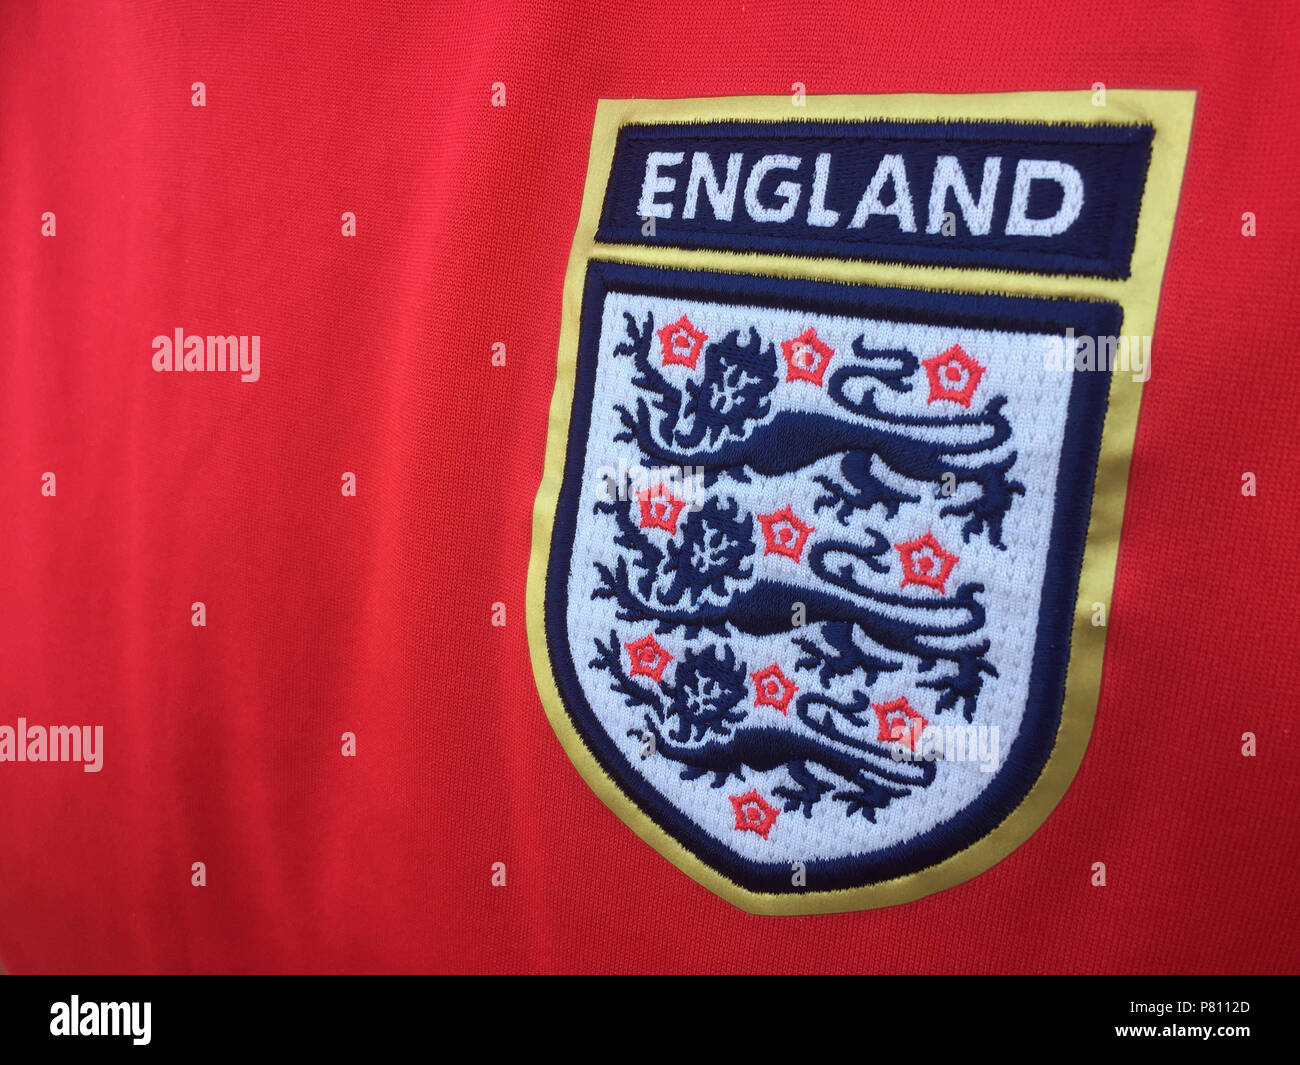 3 LIONS SMALL ST GEORGE CREST ENGLAND FOOTBALL WORLD CUP 2018 T-SHIRT KIDS 